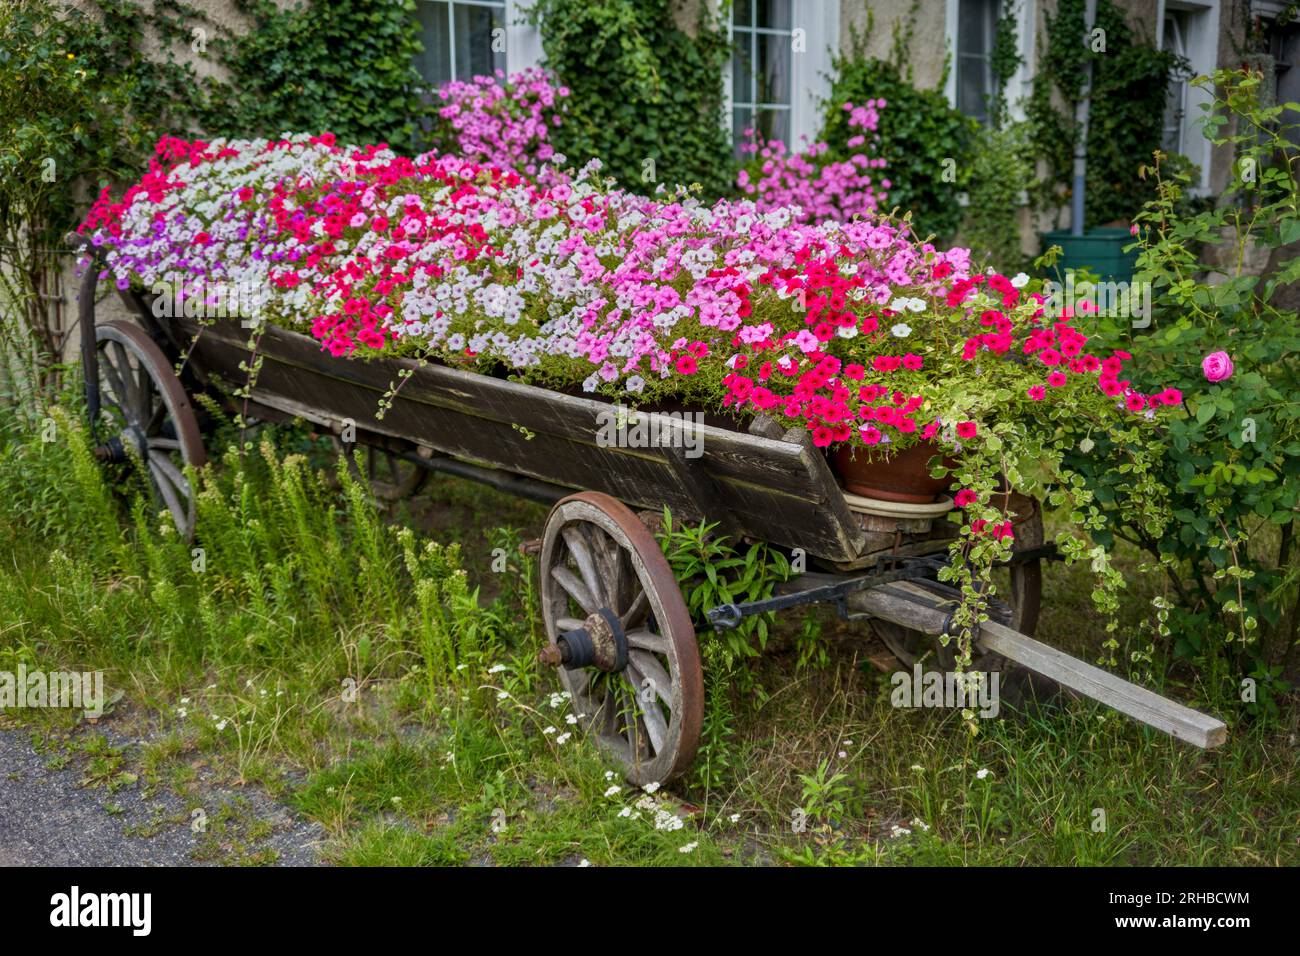 old wooden horse cart full of blooming multicolored petunias Stock Photo